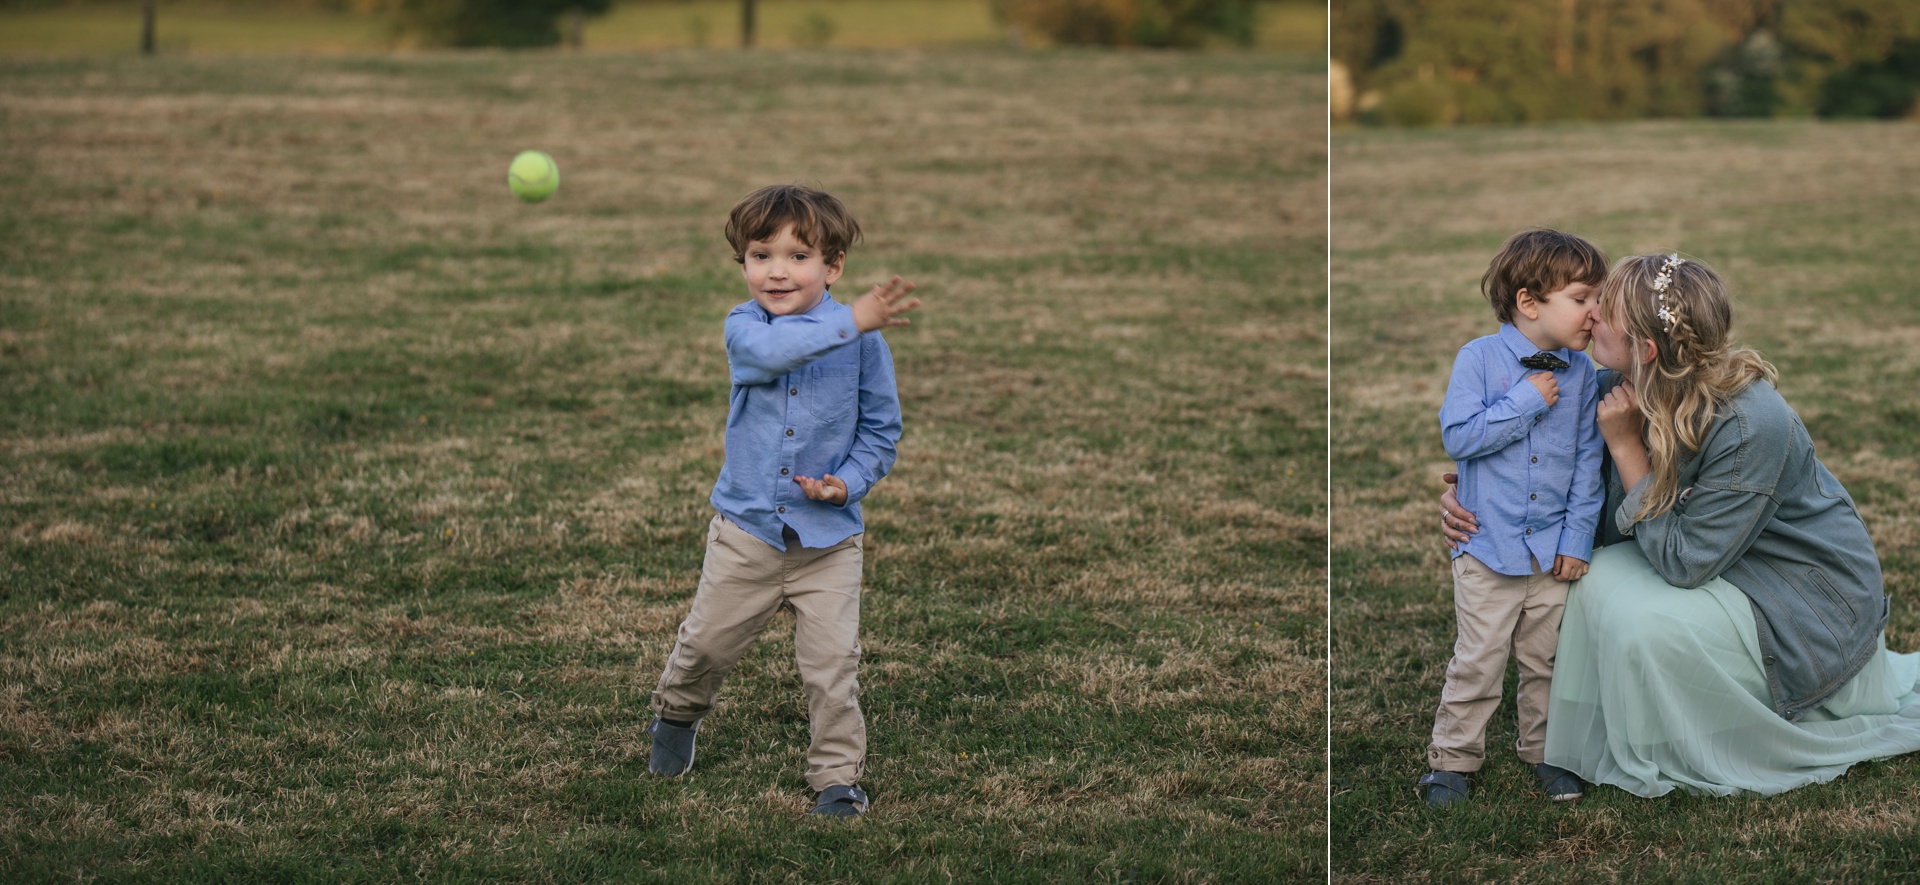 Page boy throwing ball